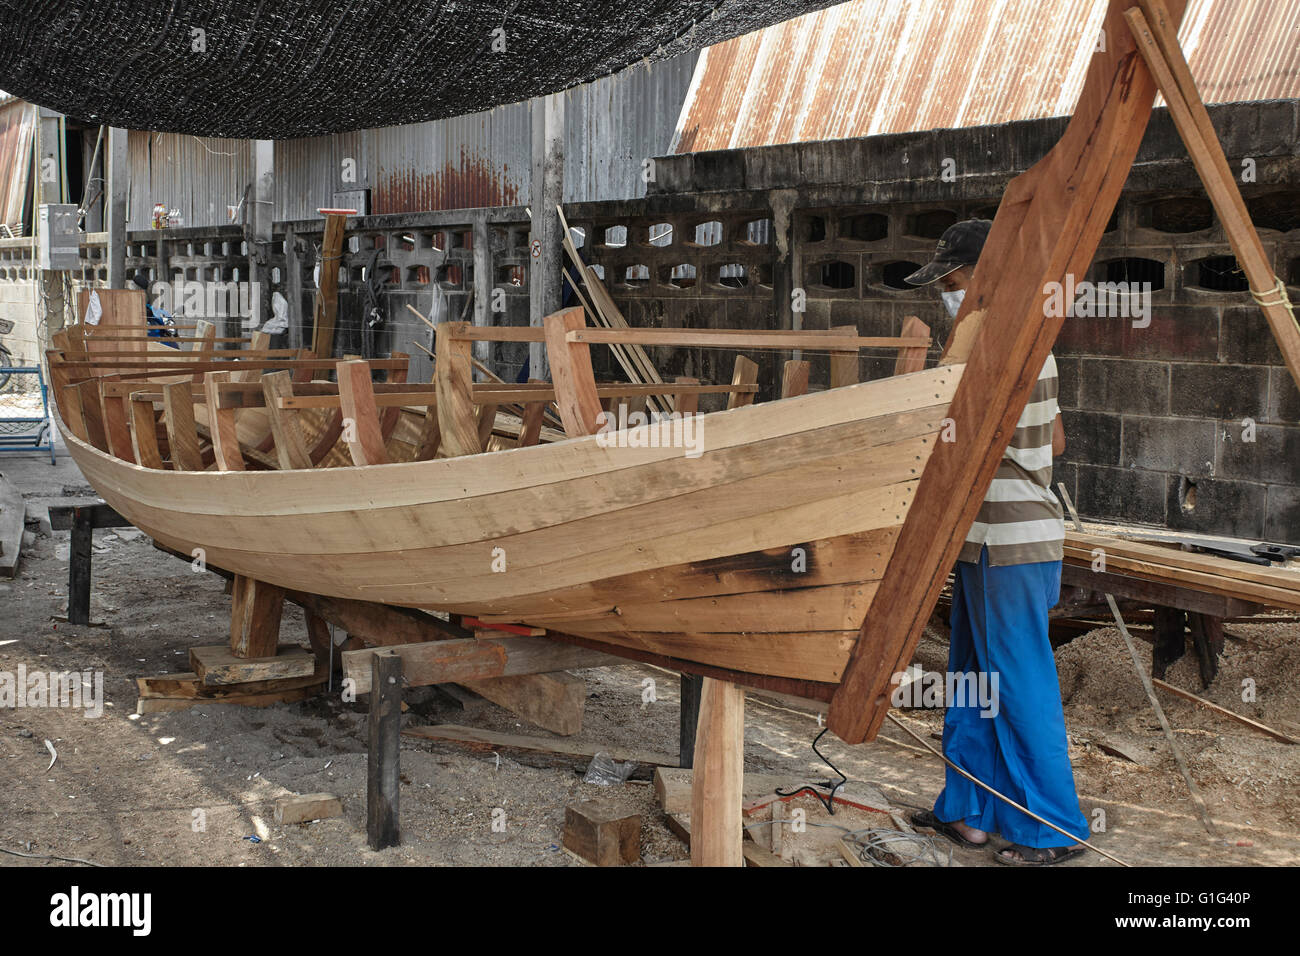 Thailand boat builder. Craftsman building a traditional wooden boat. Thailand S. E. Asia Stock Photo